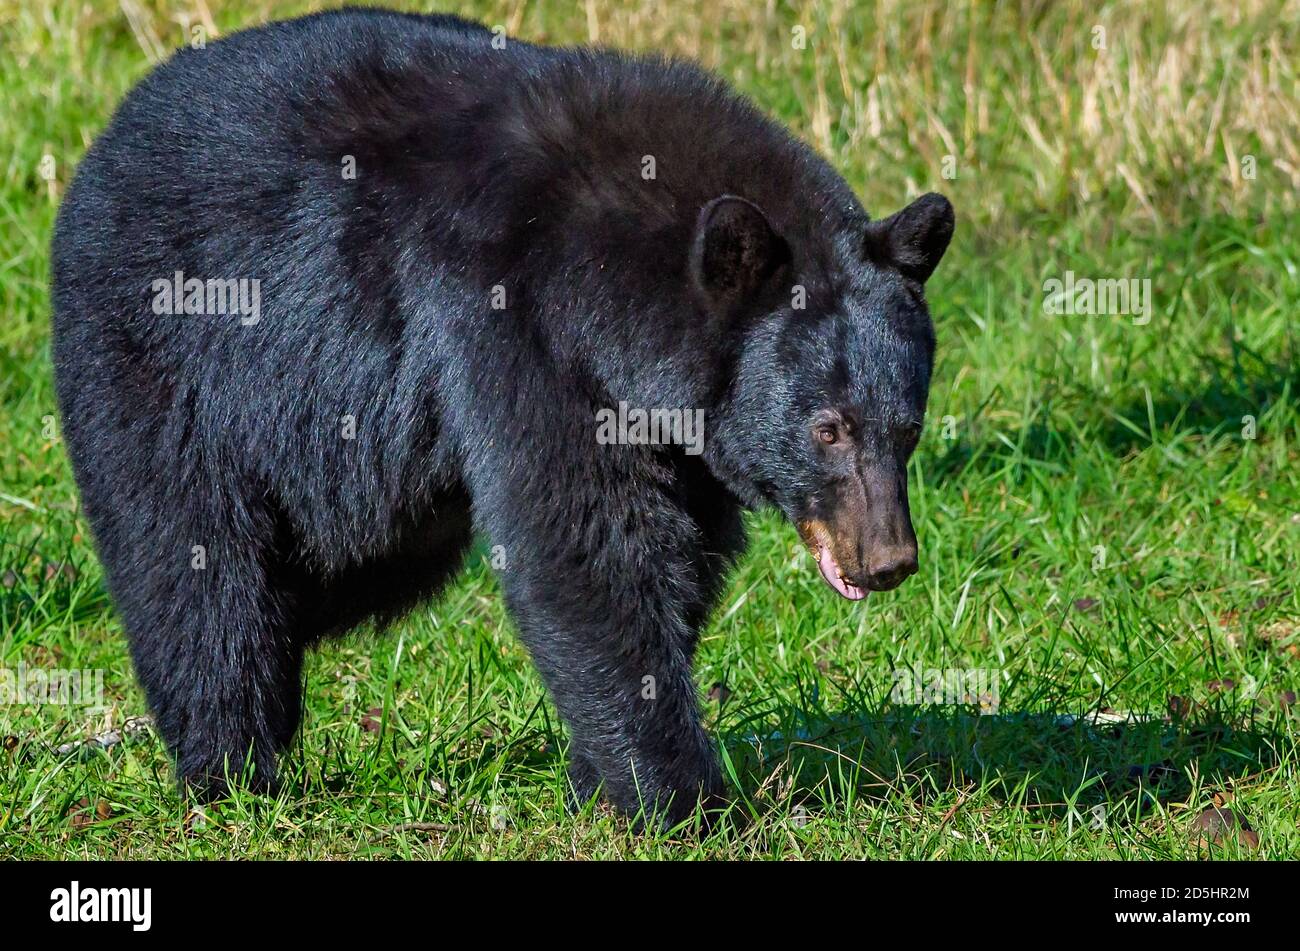 A female black bear stands in Cades Cove at Great Smoky Mountains National Park in Tennessee. Stock Photo